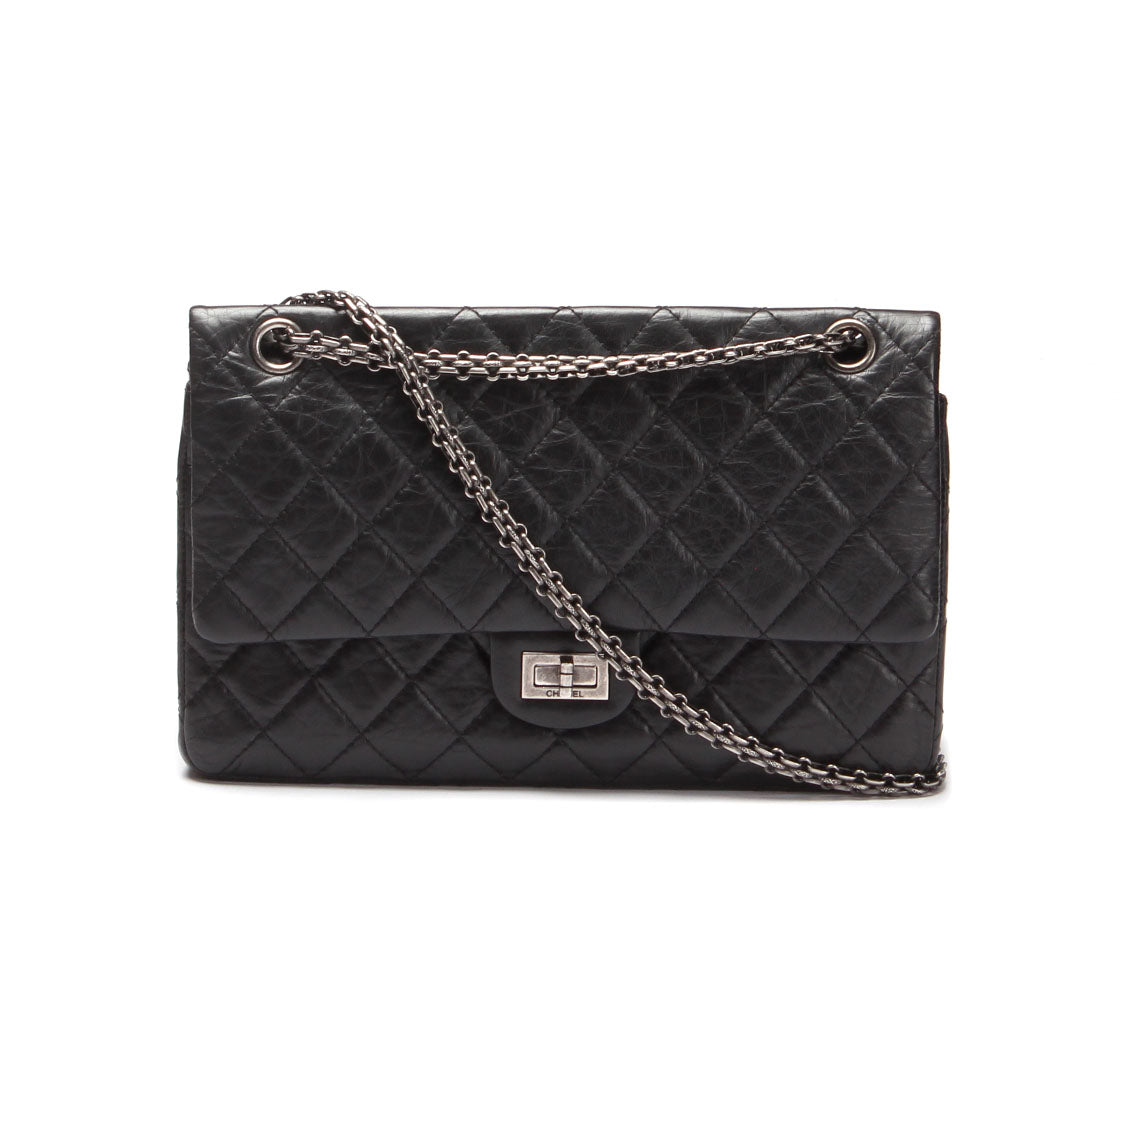 Reissue 2.55 Quilted Leather Flap Bag – LuxUness